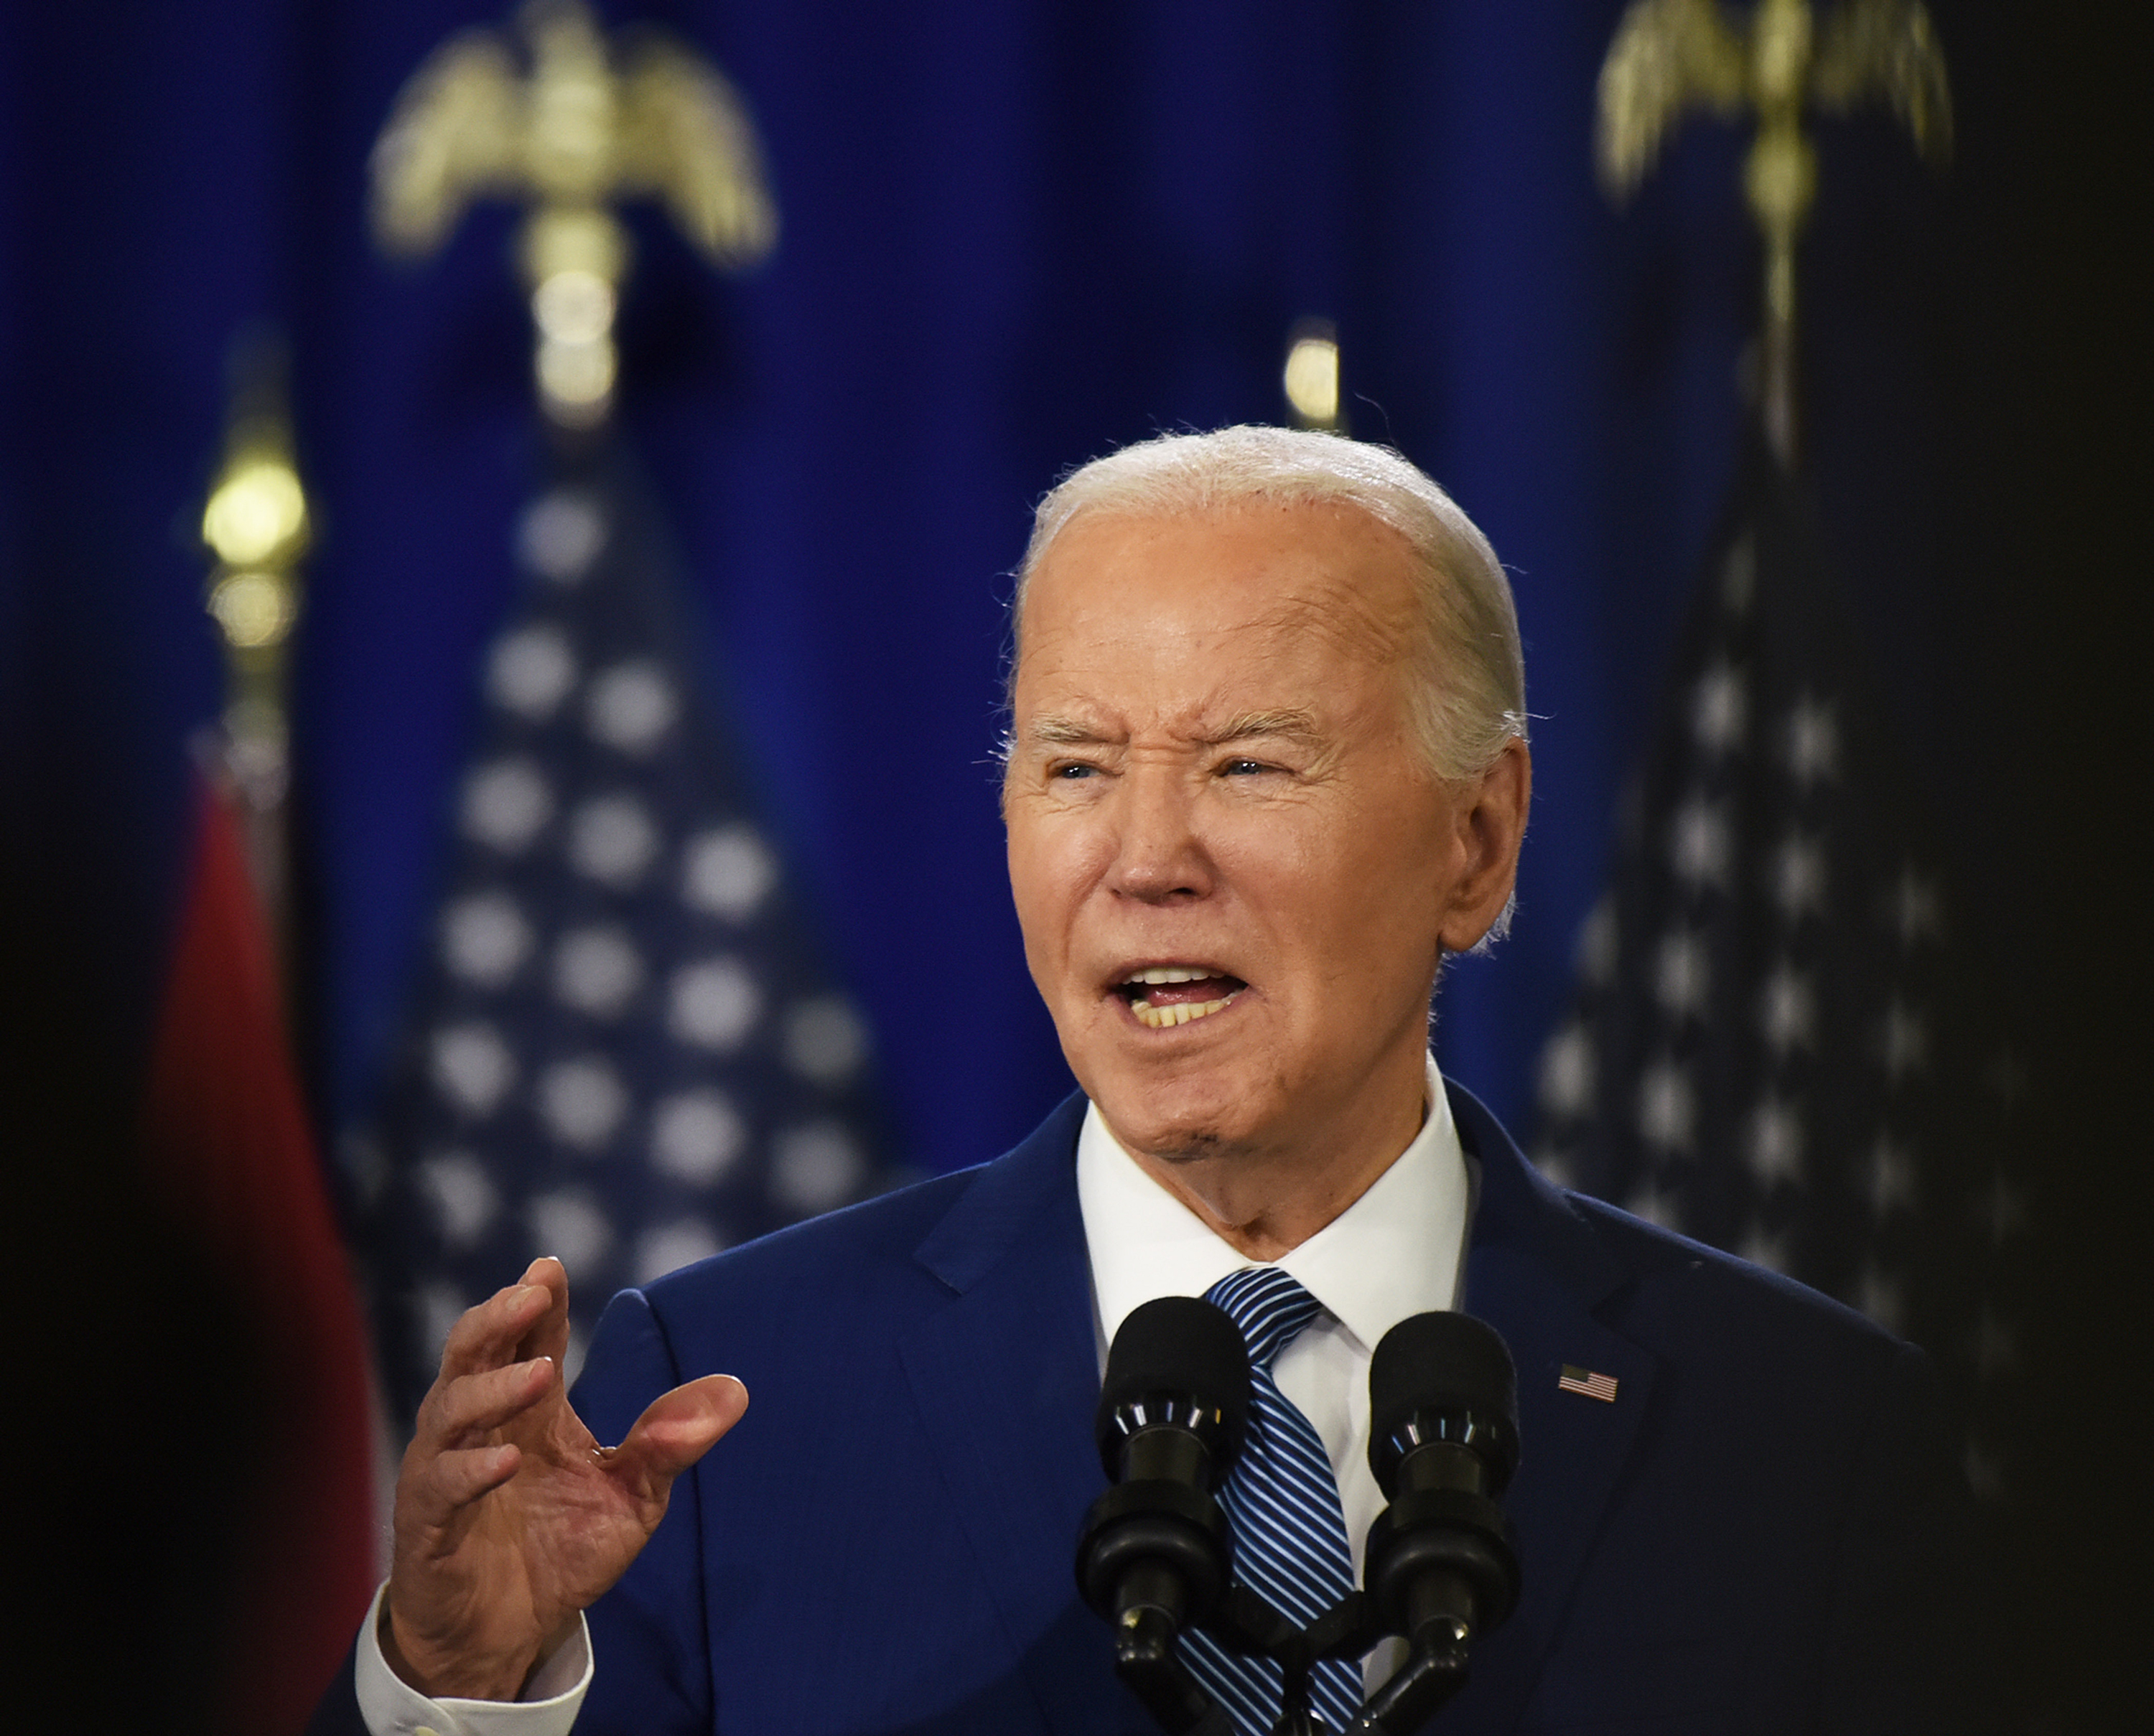 Joe Biden speaks at a reproductive freedom event at Hillsborough Community College in Tampa, Florida on April 23.